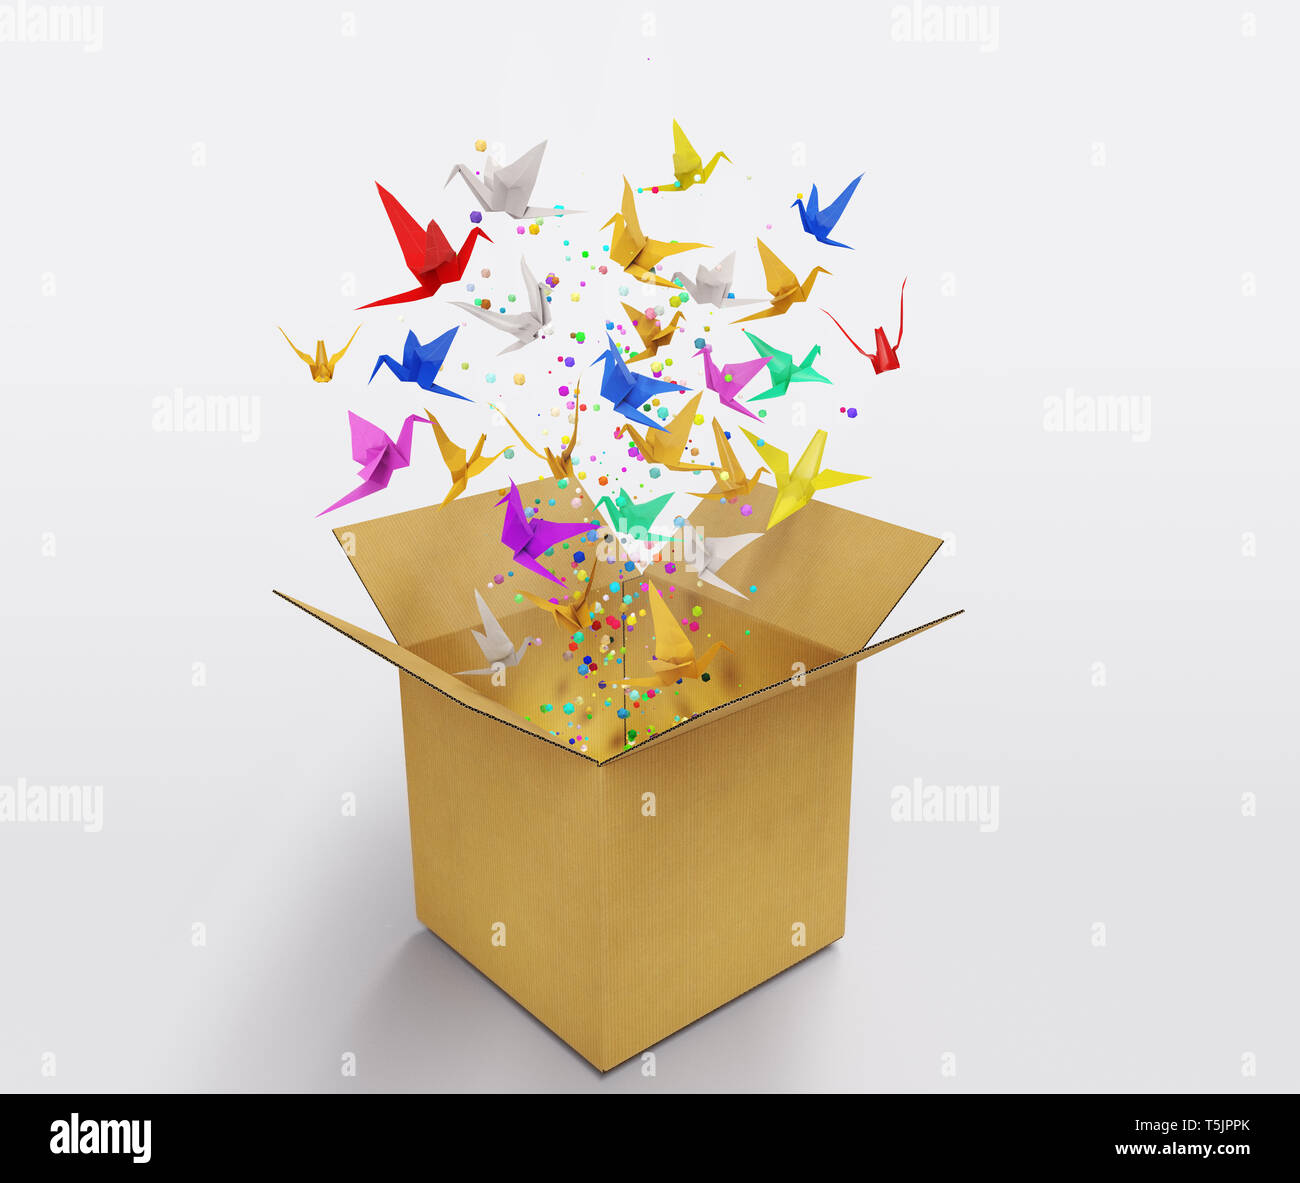 origami birds abstract concept of think out of the box and creativity 3D illustration Stock Photo